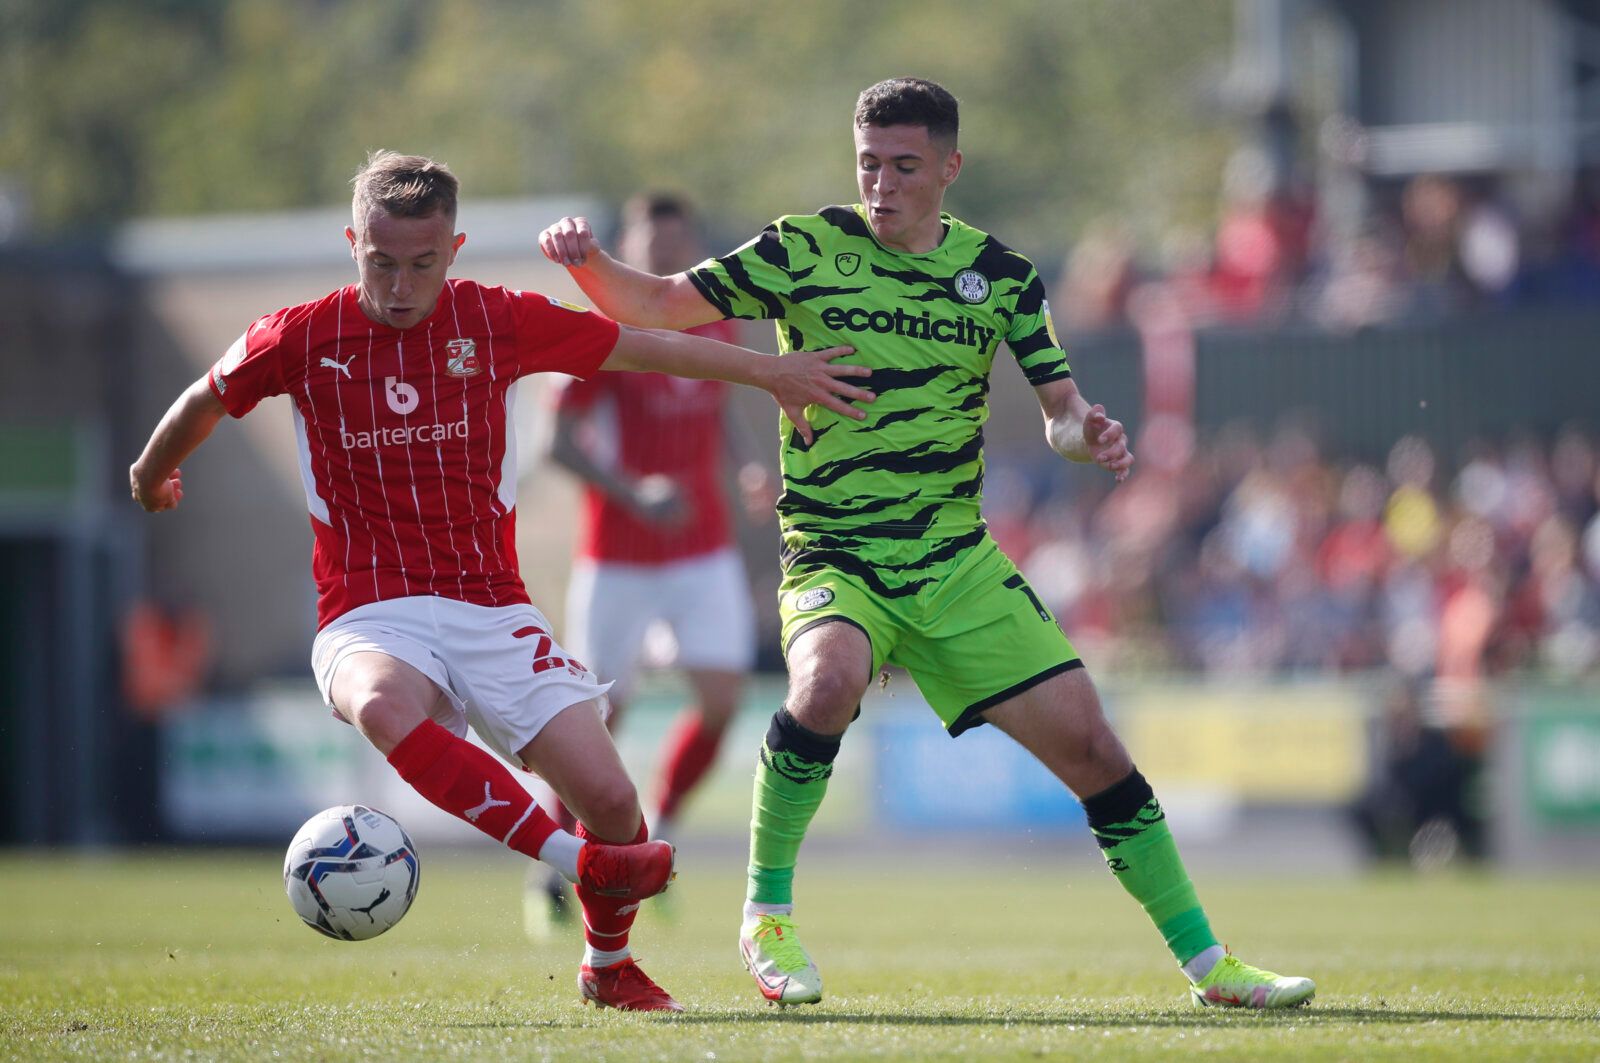 Soccer Football - League Two - Forest Green Rovers v Swindon Town - The New Lawn Stadium, Nailsworth, Britain - October 9, 2021 Forest Green Rovers’ Jack Aitchison in action with Swindon Town’s Louis Reed Action Images/Matthew Childs EDITORIAL USE ONLY. No use with unauthorized audio, video, data, fixture lists, club/league logos or 'live' services. Online in-match use limited to 75 images, no video emulation. No use in betting, games or single club /league/player publications.  Please contact y